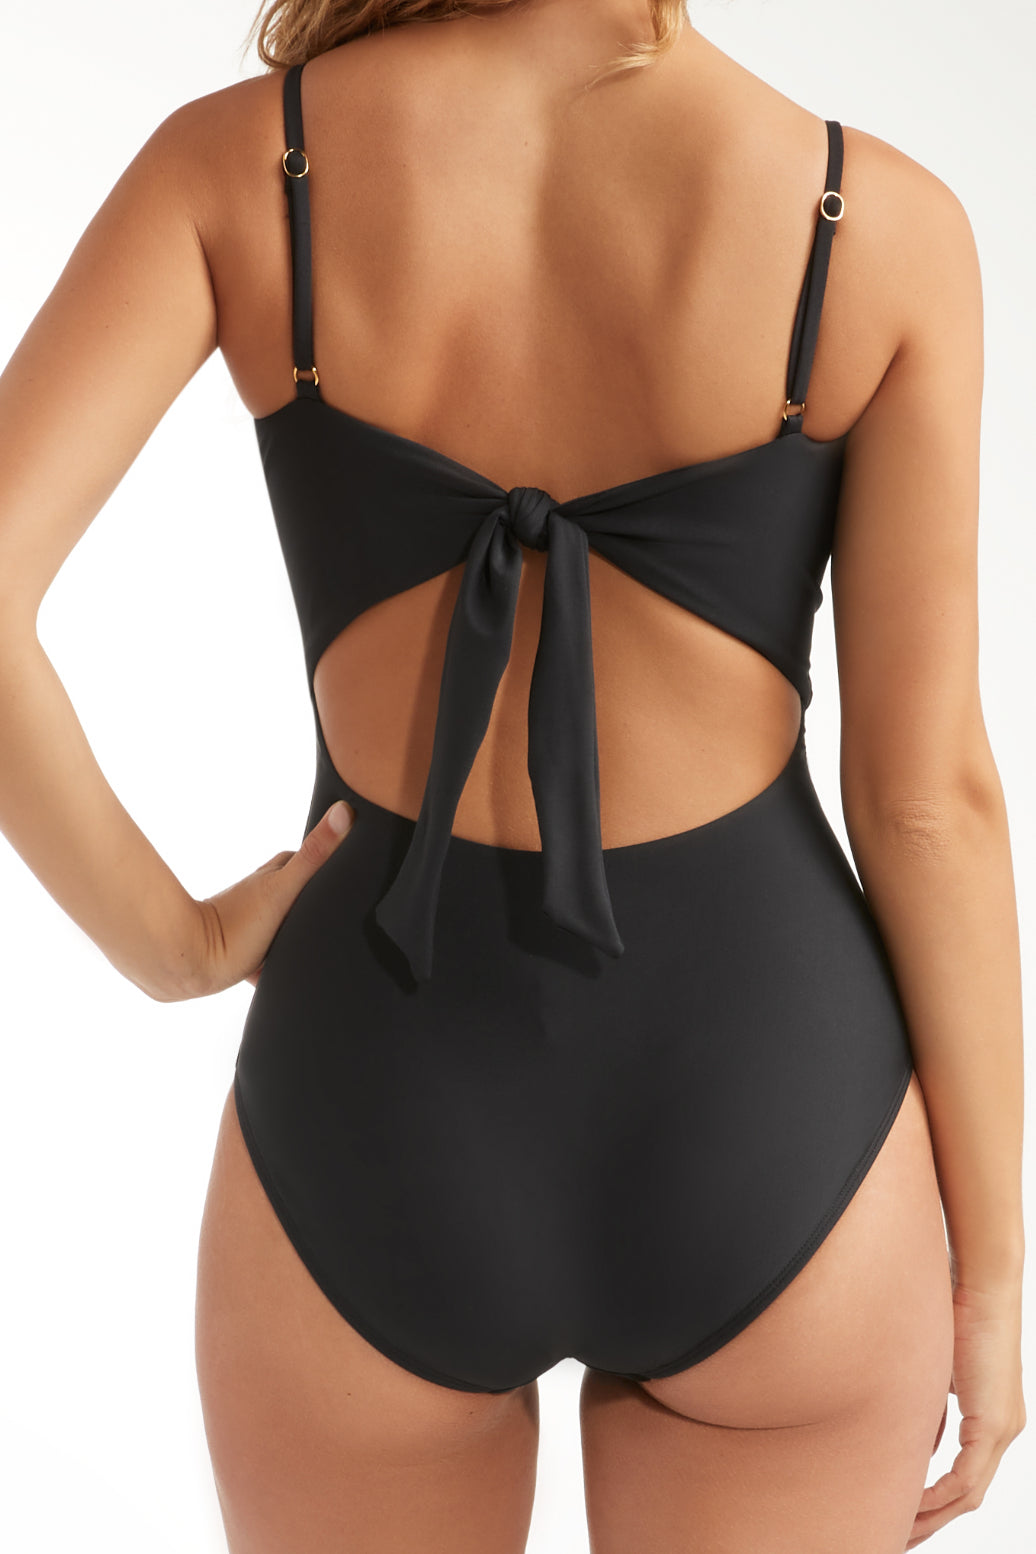 Slimming Swimsuits - Best One Piece & Support Swimwear – Hermoza